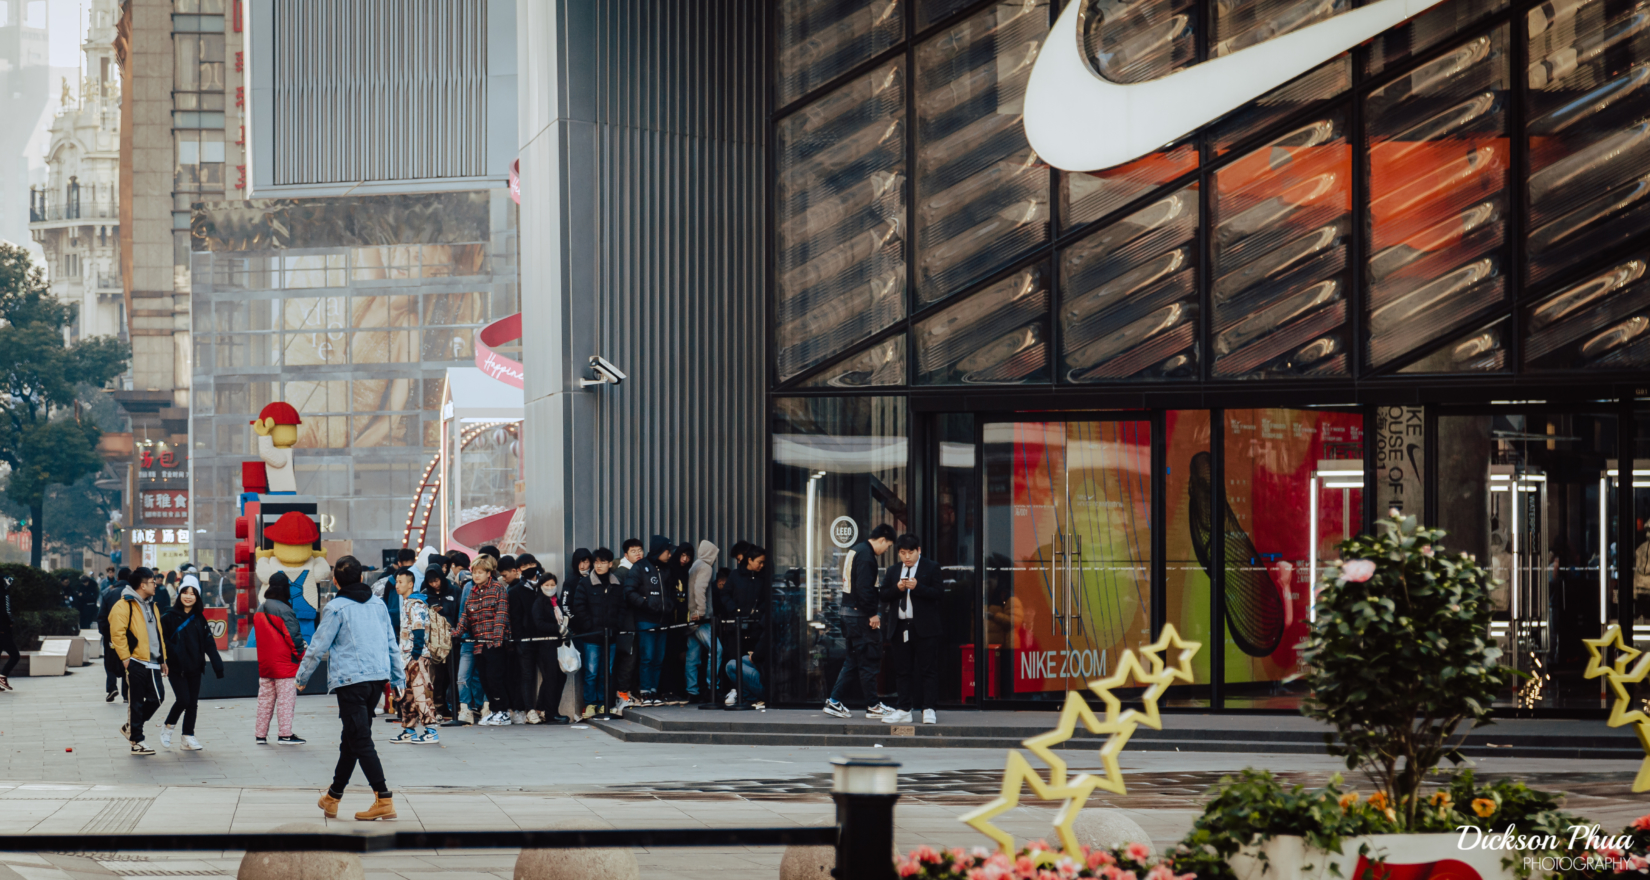 Decades ago, getting a pair of Nike shoes in Mainland China would have been almost impossible. Now, with the opening up of Mainland China, queues like these are getting commonplace. Of course, there are still the risk of counterfeit items or even entire stores in China.